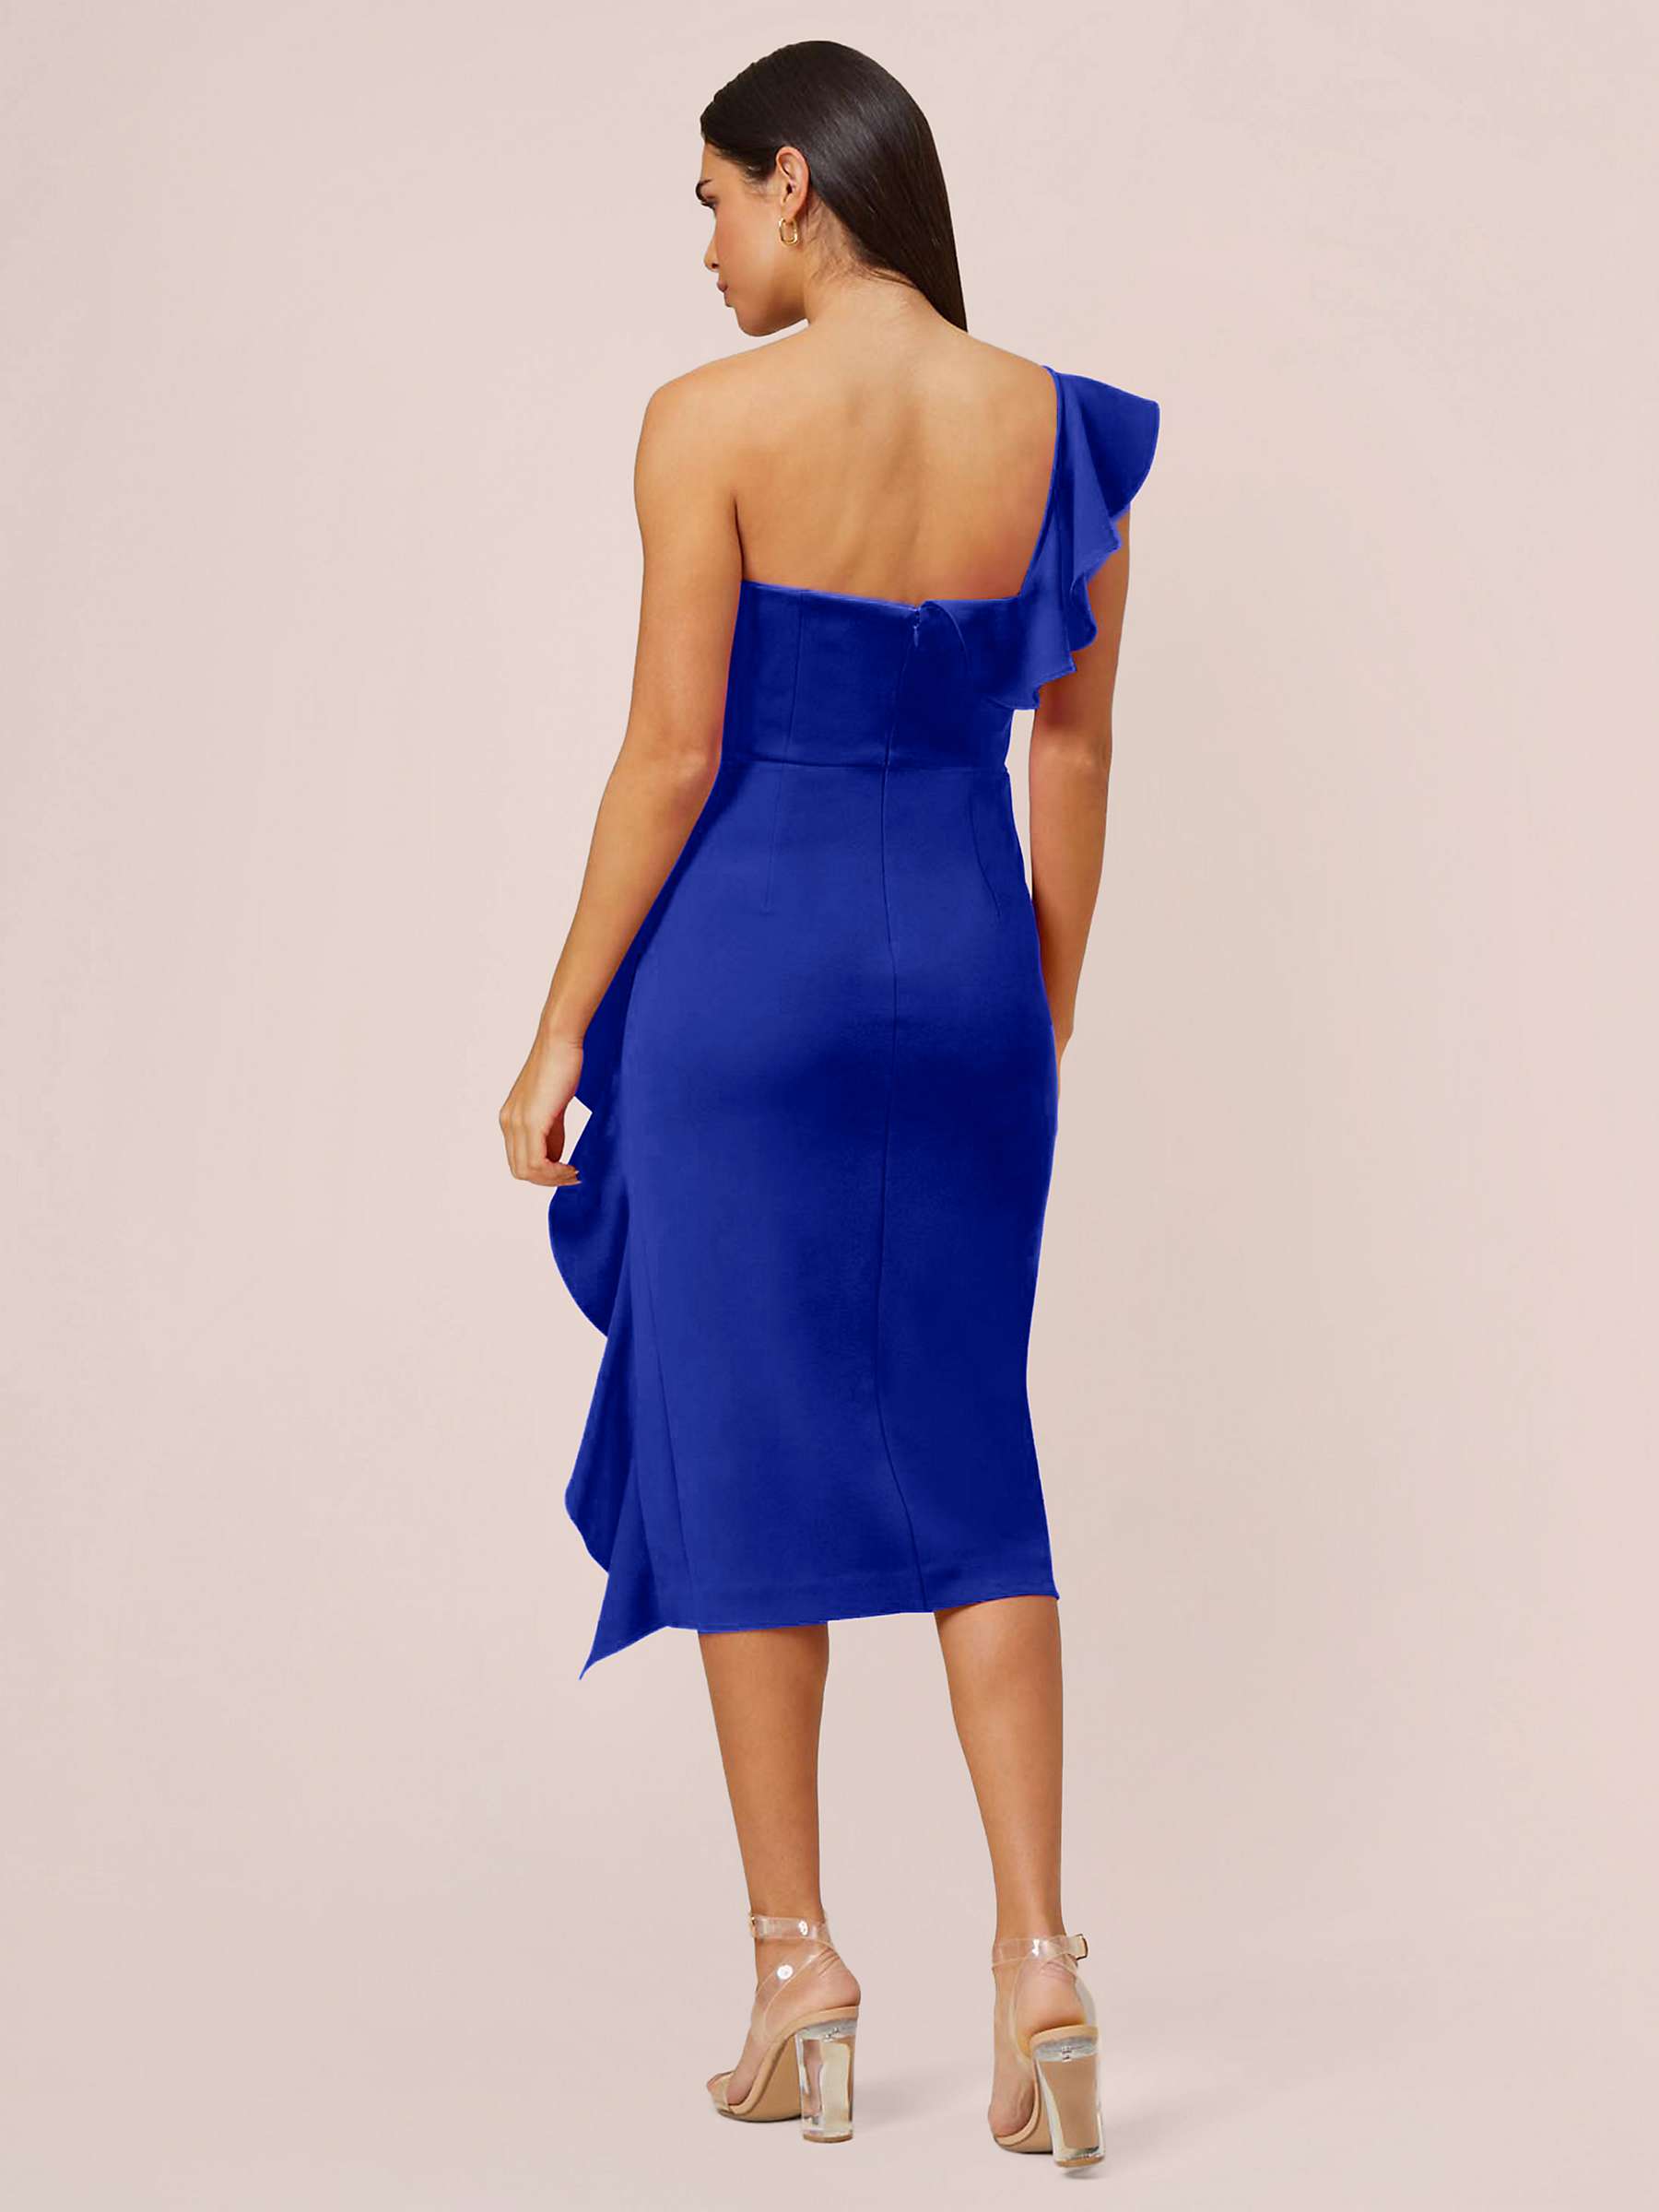 Buy Aidan by Adrianna Papell Knit Crepe Cocktail Dress Online at johnlewis.com